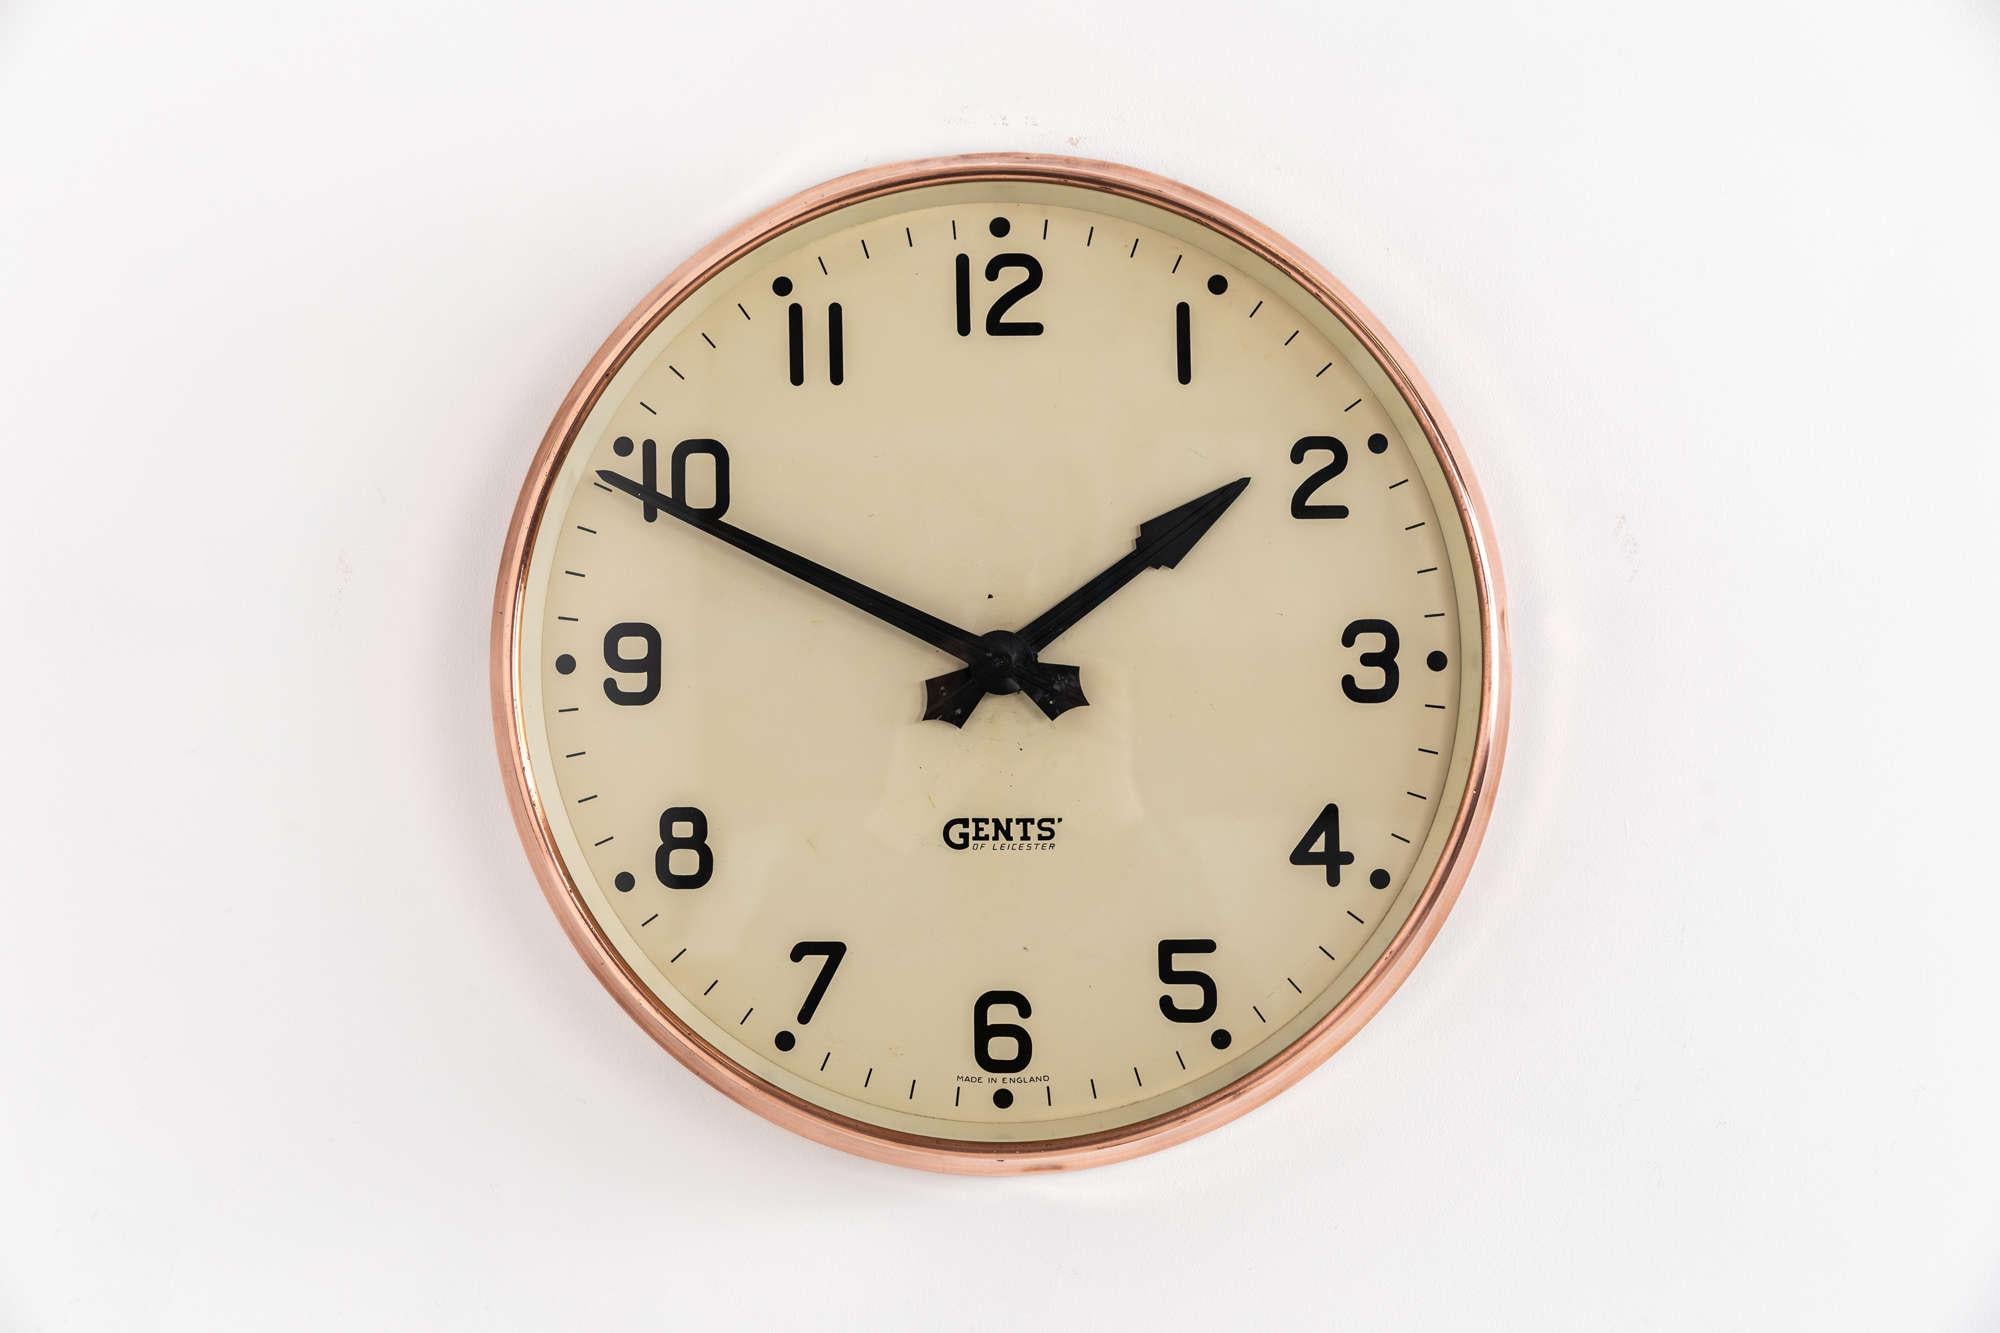 English Vintage Industrial Copper Gents of Leicester Factory Railway Wall Clock c.1930 For Sale